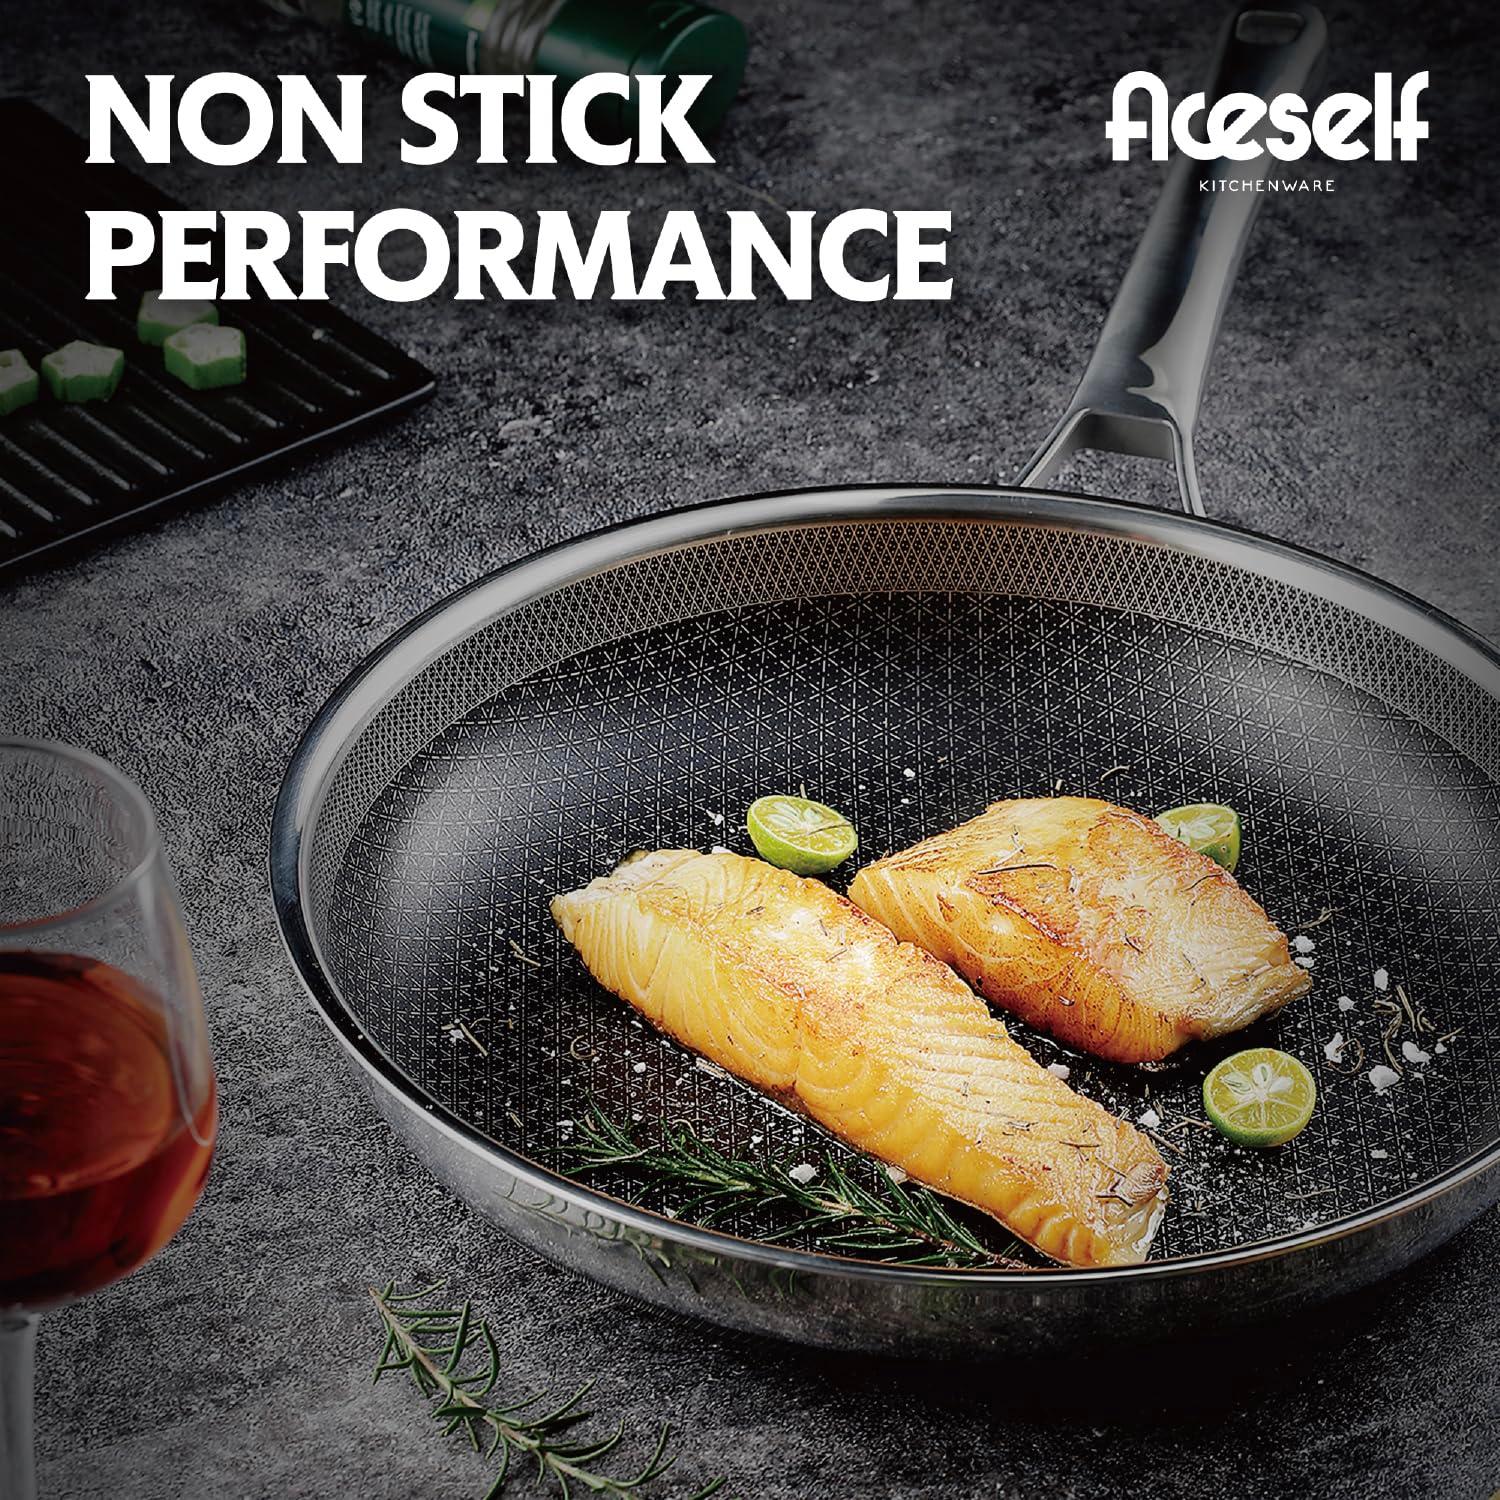 Aceself Hybrid 10 inch Frying Pans Nonstick,PFOA&PTFE Free Cookware,non stick Stainless Steel Skillets,Dishwasher and Oven Safe, Works on Induction,Ceramic and Gas Cooktops - CookCave